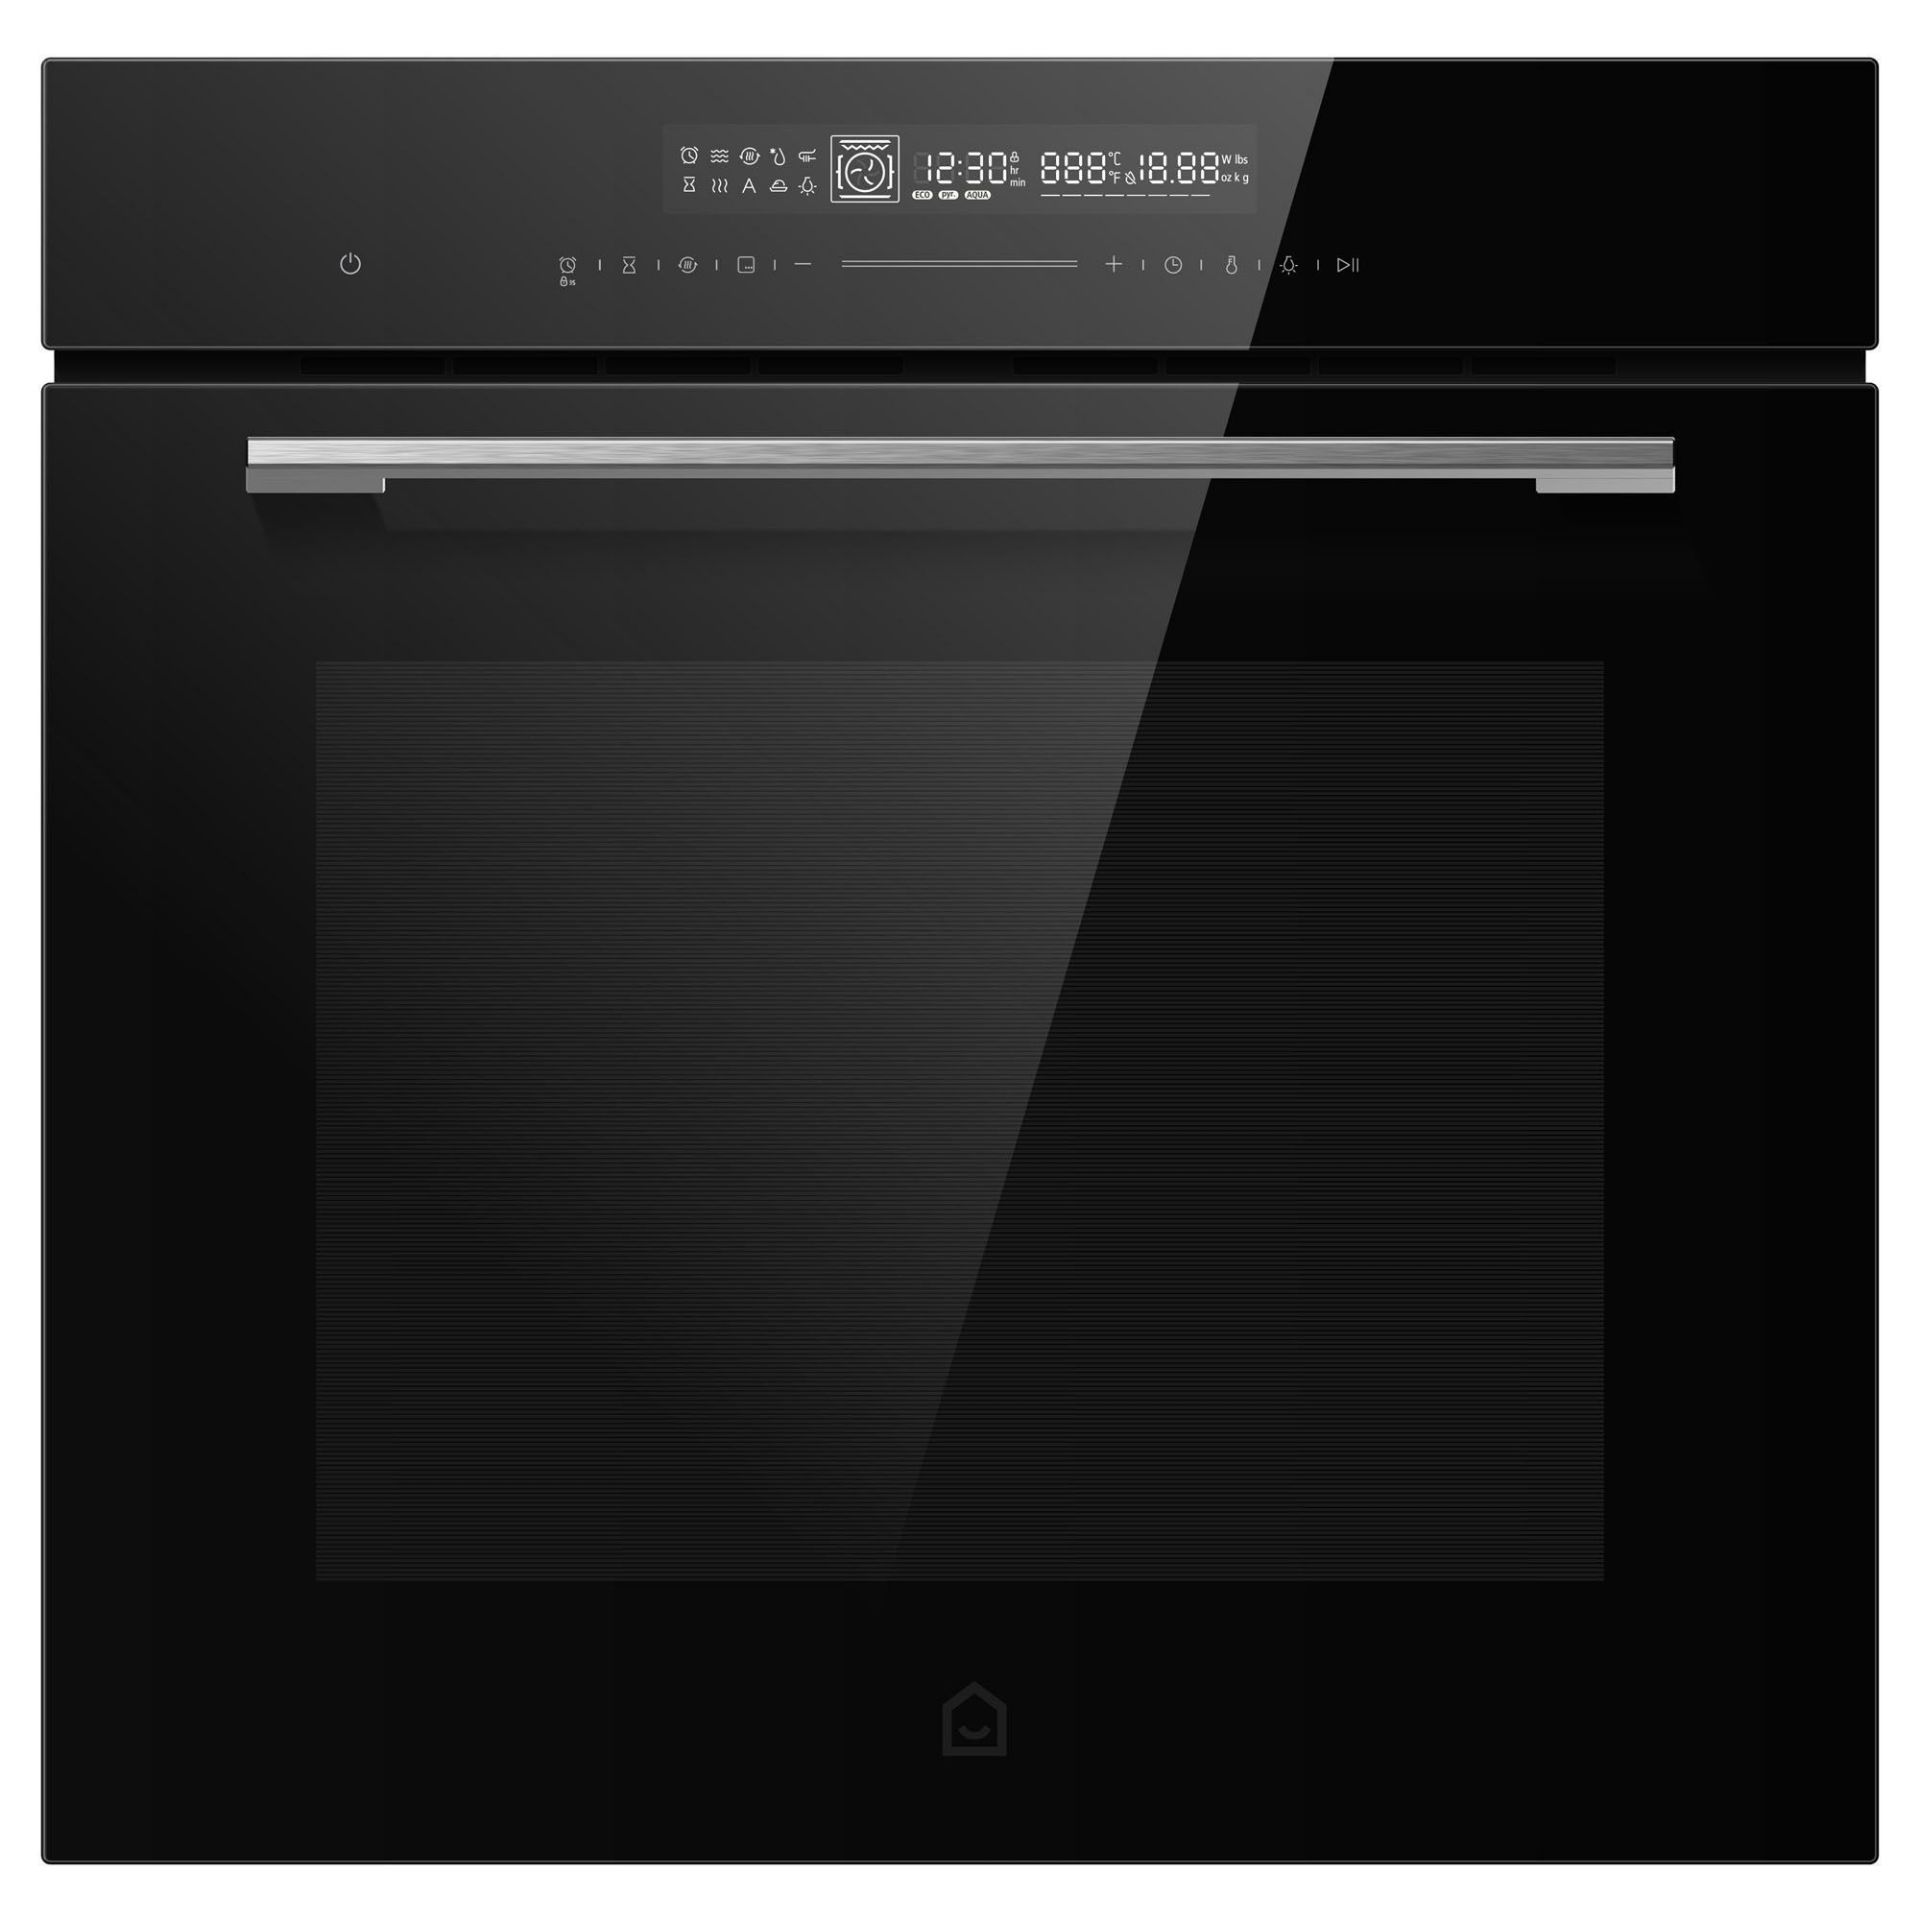 GoodHome Built-in Single Multifunction Oven - Gloss Black - ER49 *Please note this oven contains a